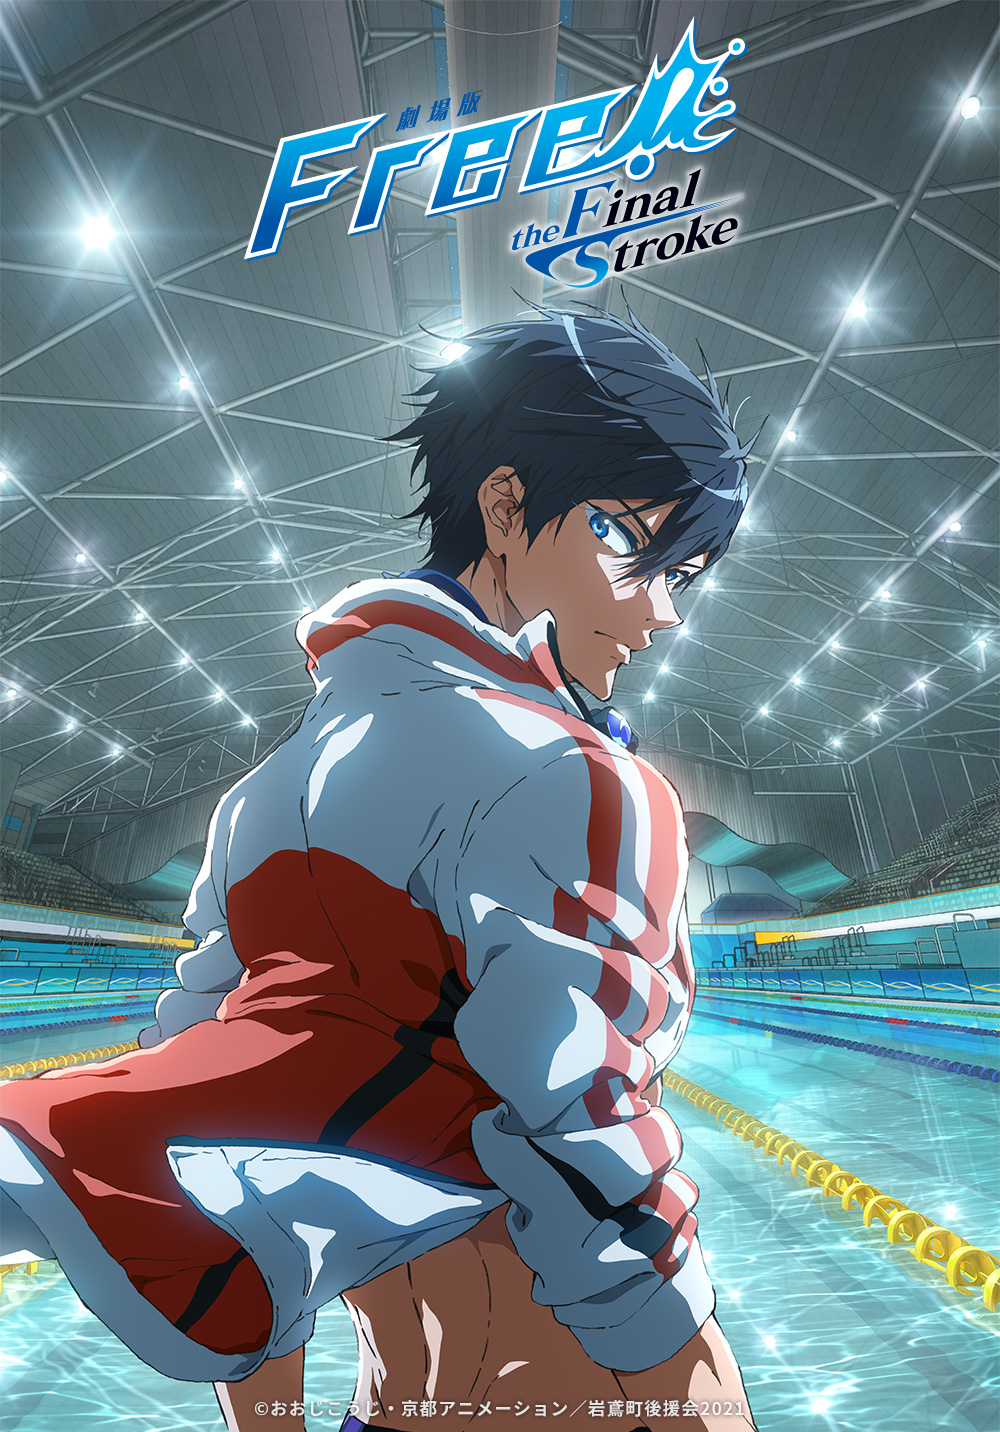 Free-movie-KV-e1606441610260 New  Visual for "Free! – the Final Stroke –" 2nd Part Released, Out in April 2022!!